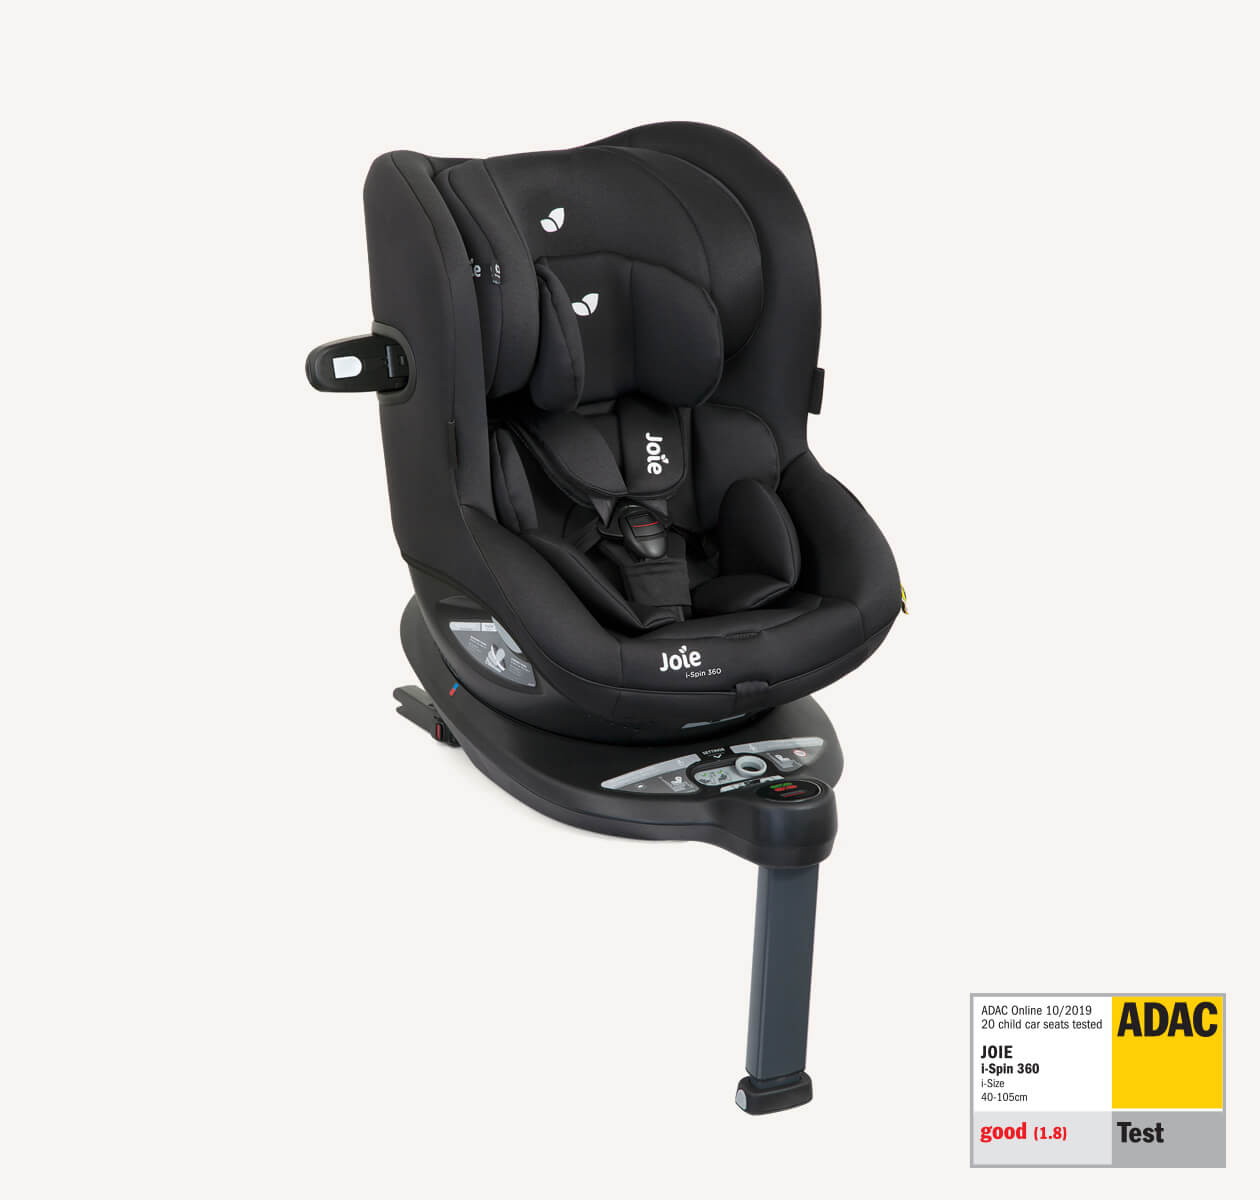  Joie I-Spin 360 spinning car seat in black at an angle.